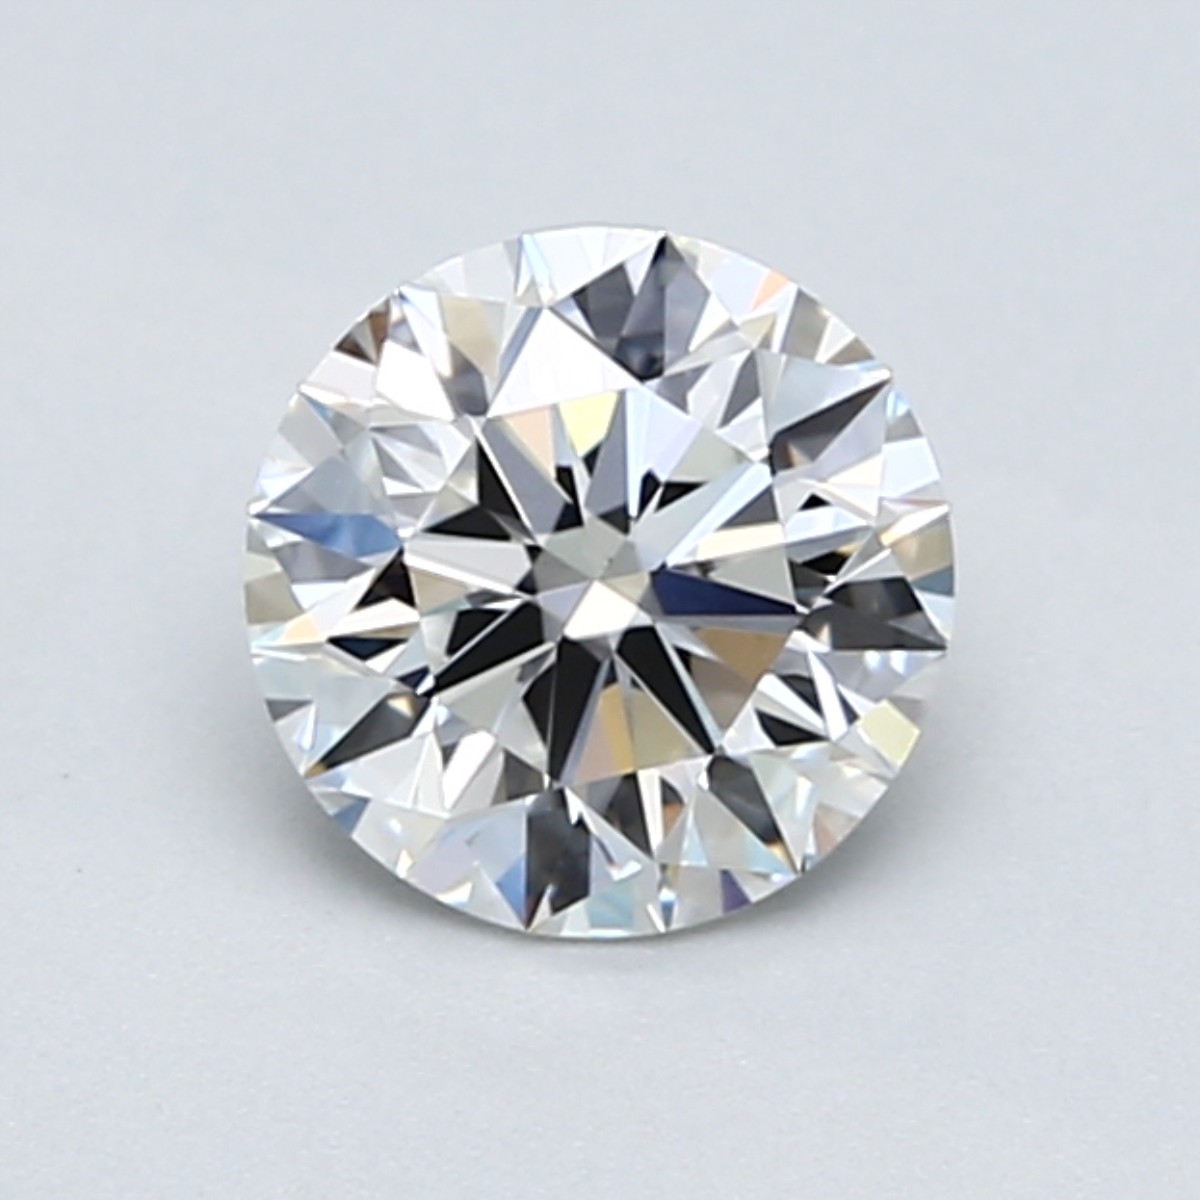 Round 0.87 Carat F Color VS1 Clarity For Sale